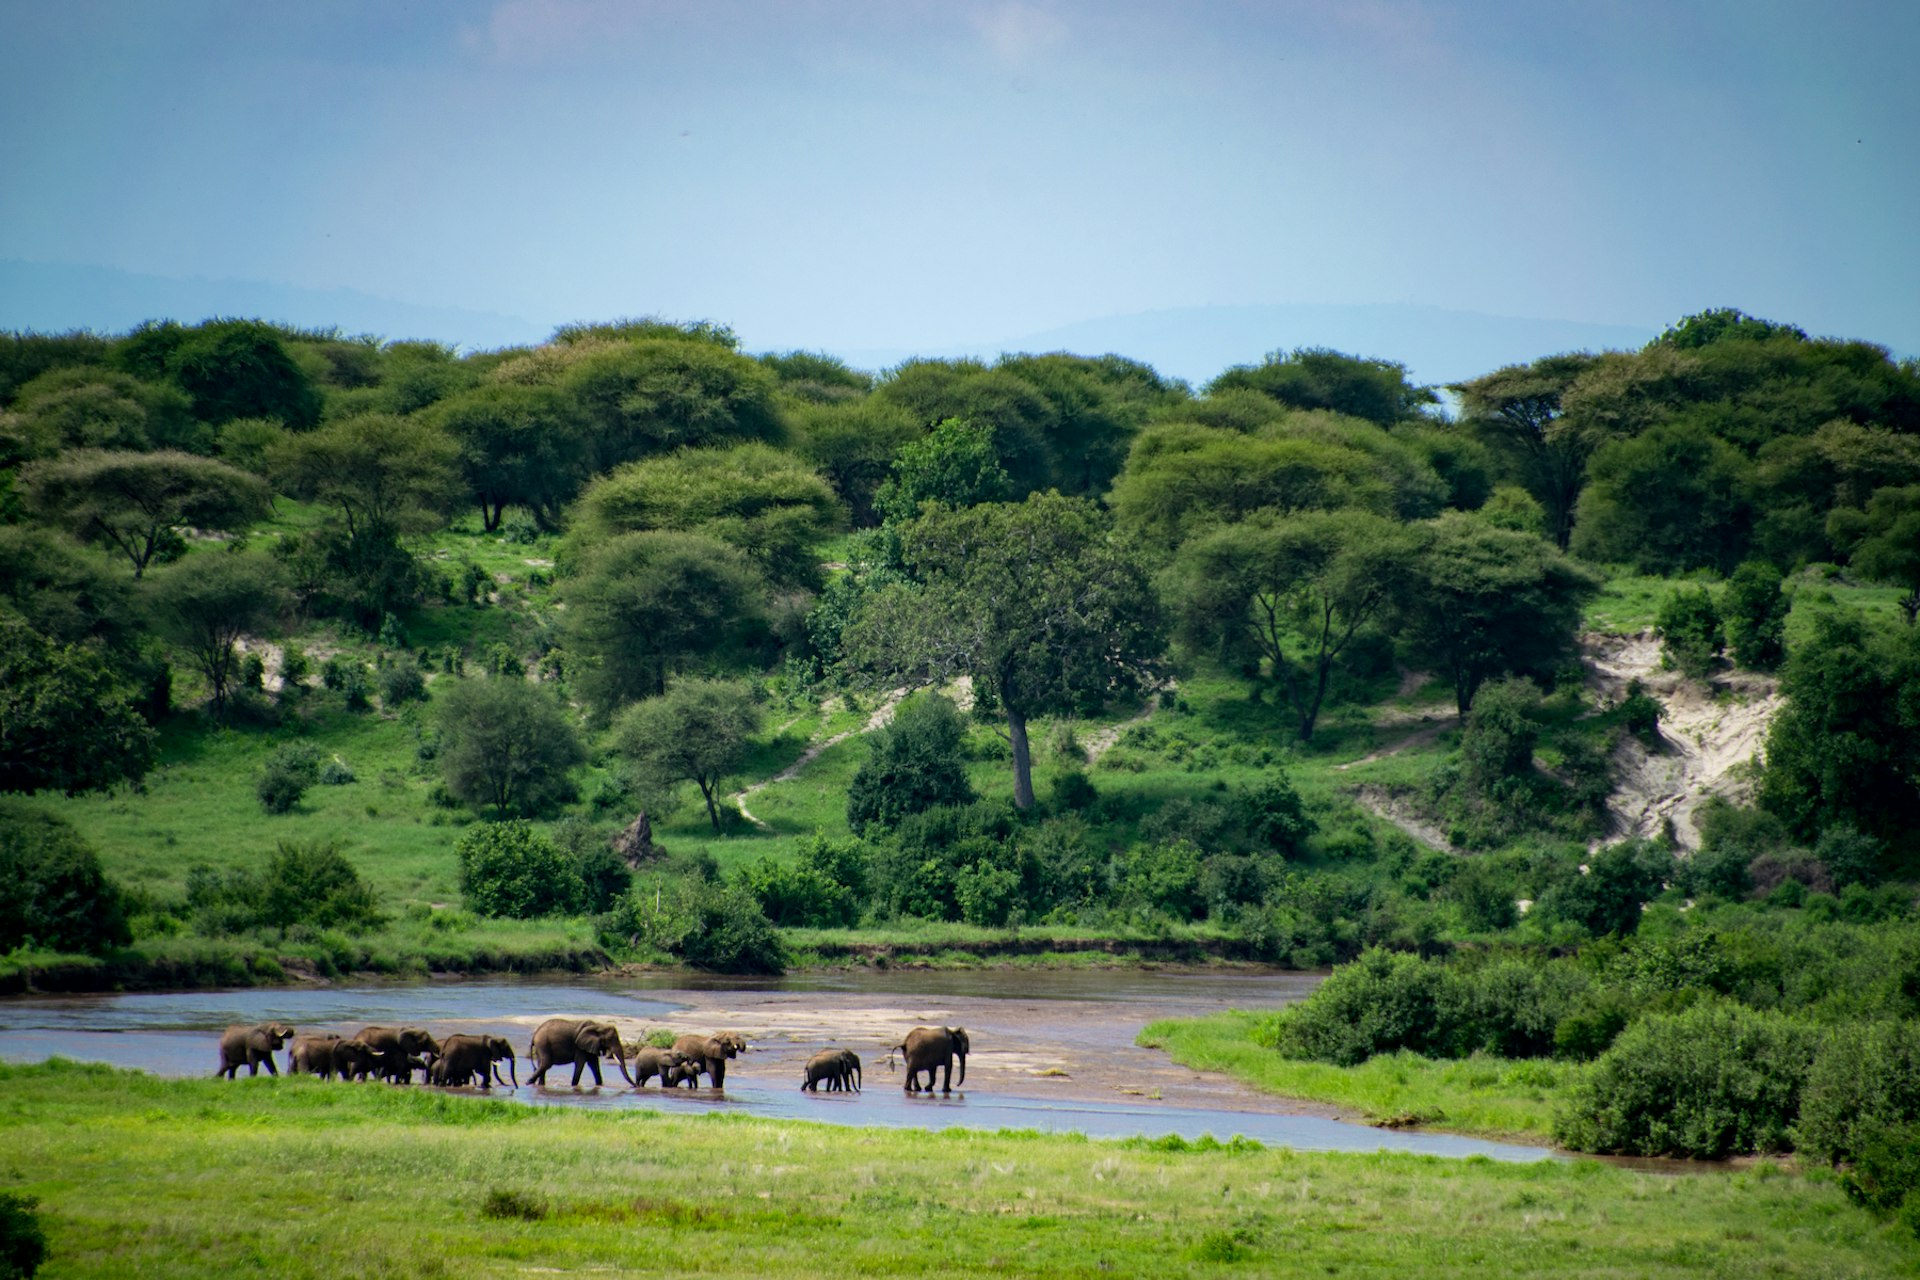 A wide shot of a family of elephants crossing a shallow river amid greenery in Tangarire National Park, Tanzania, East Africa